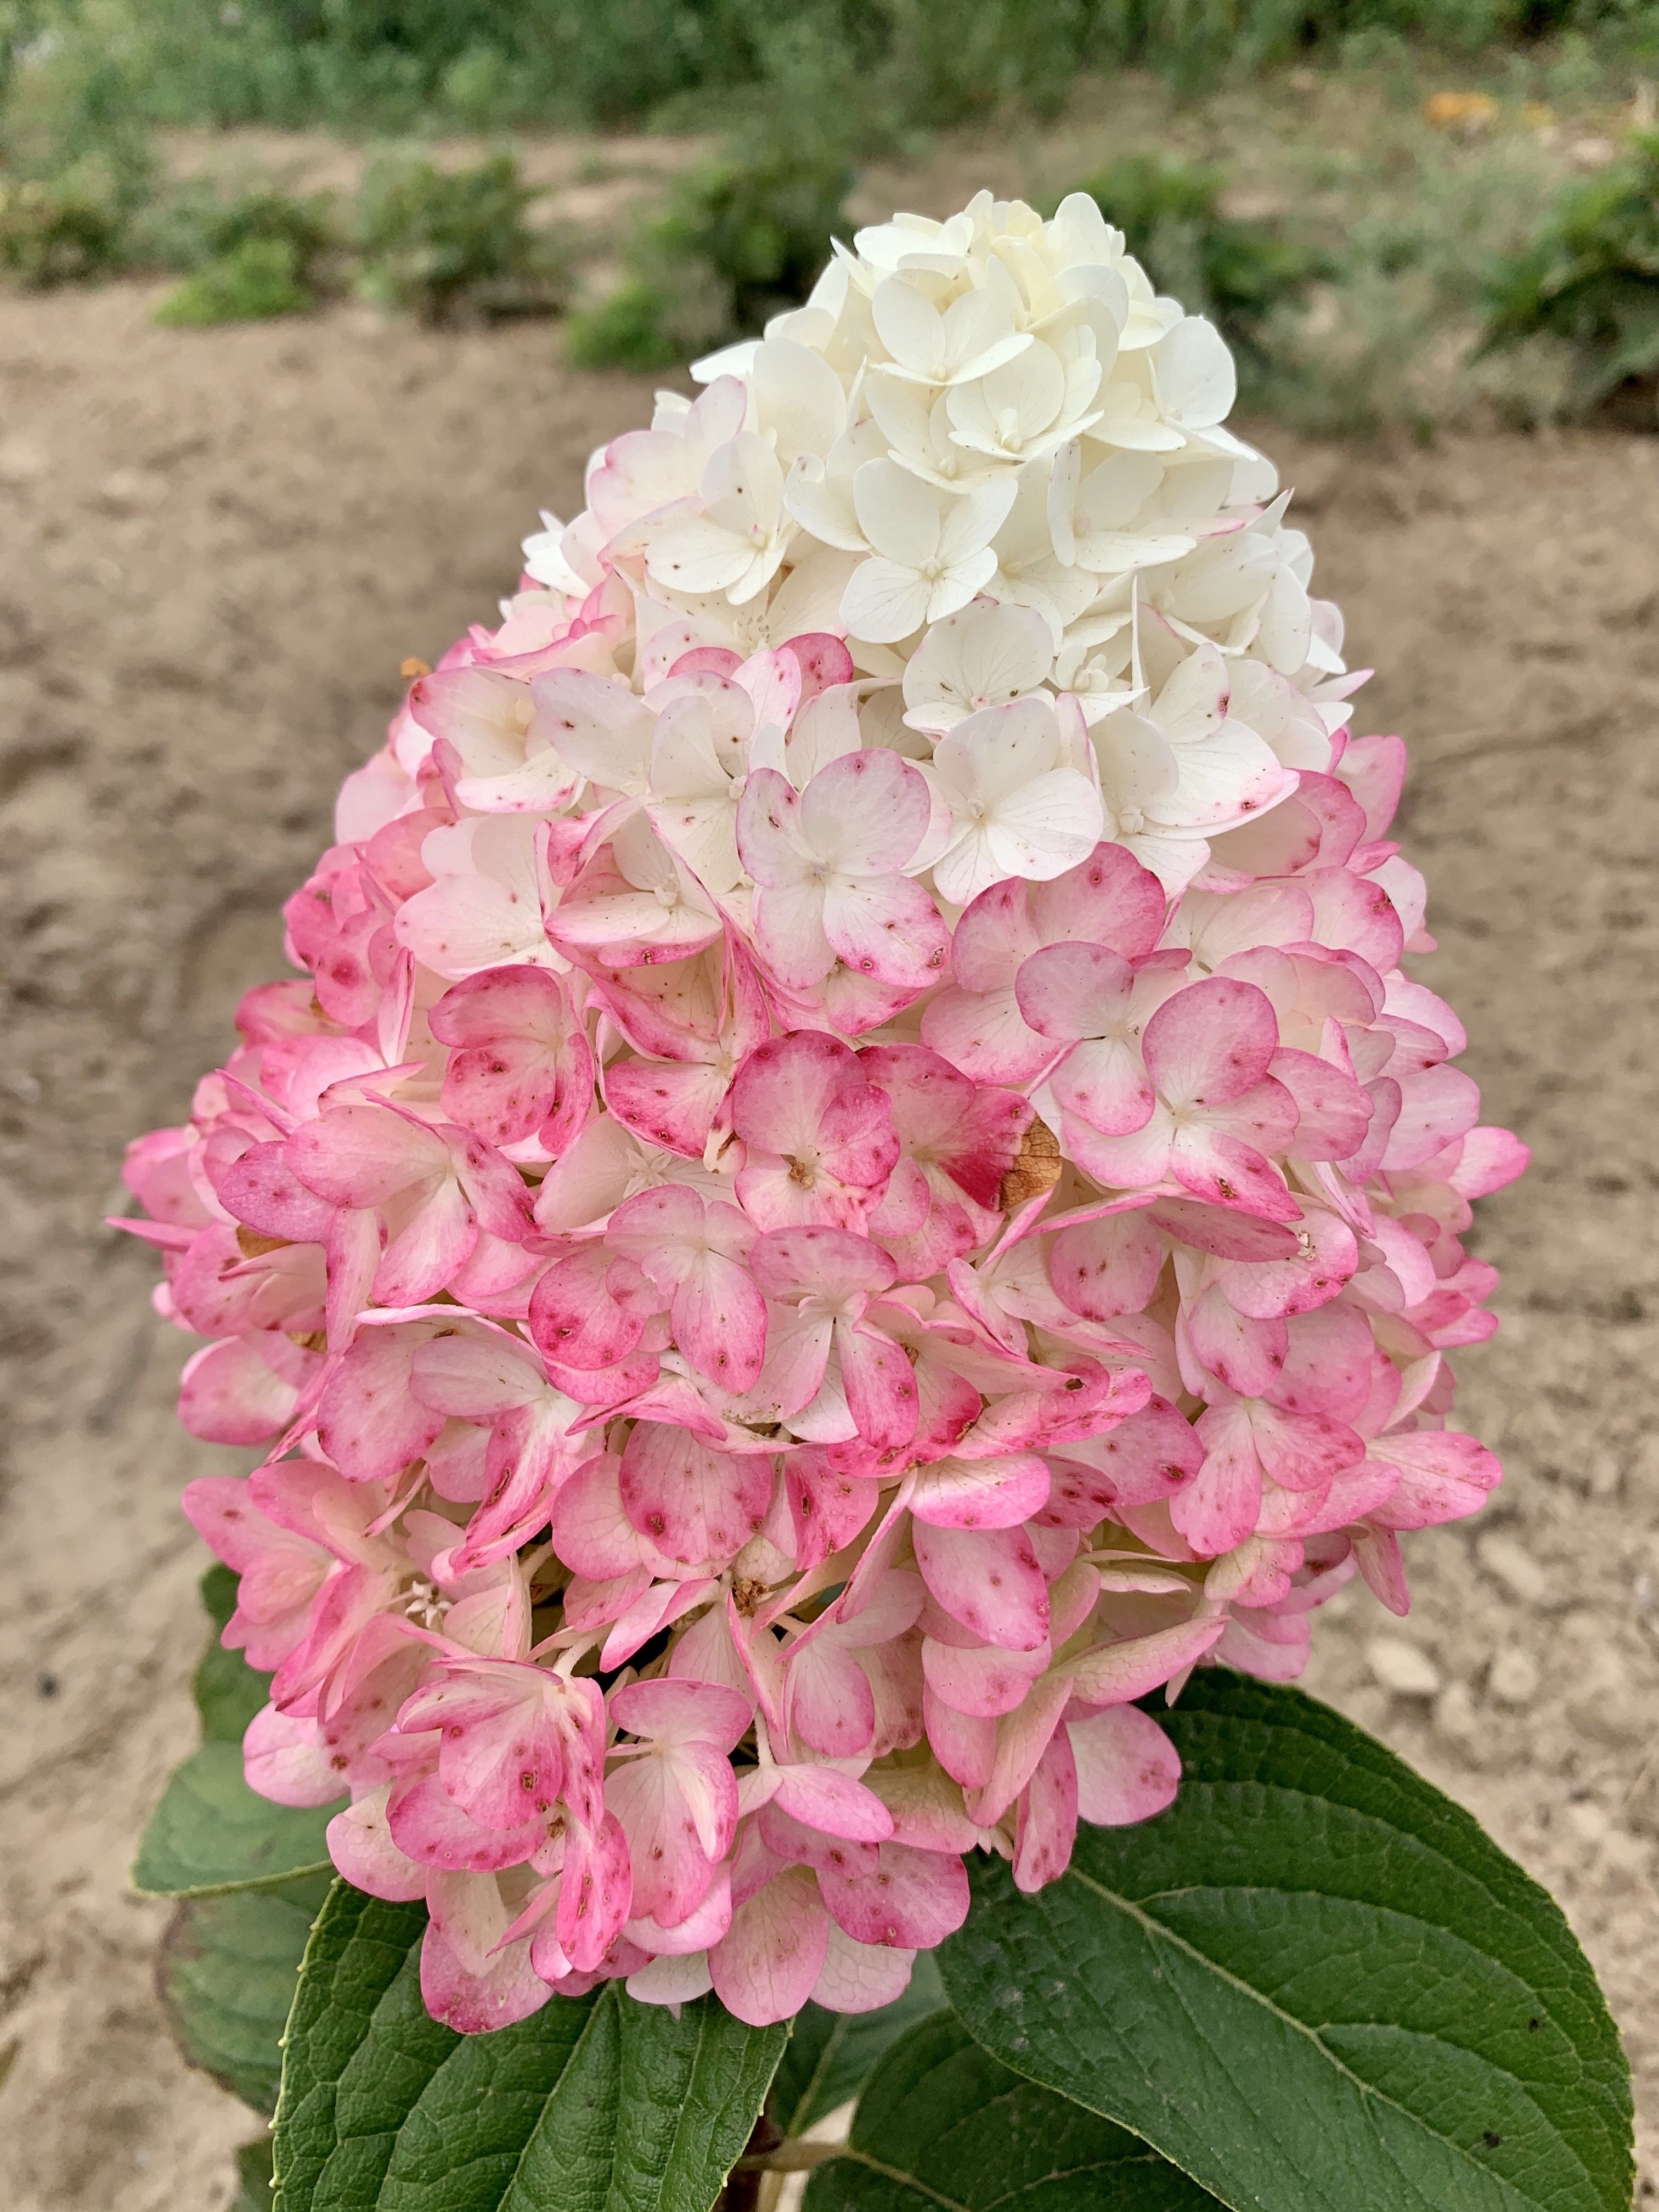 images/plants/hydrangea/hyd-magical-candle/hyd-magical-candle-0013.jpg